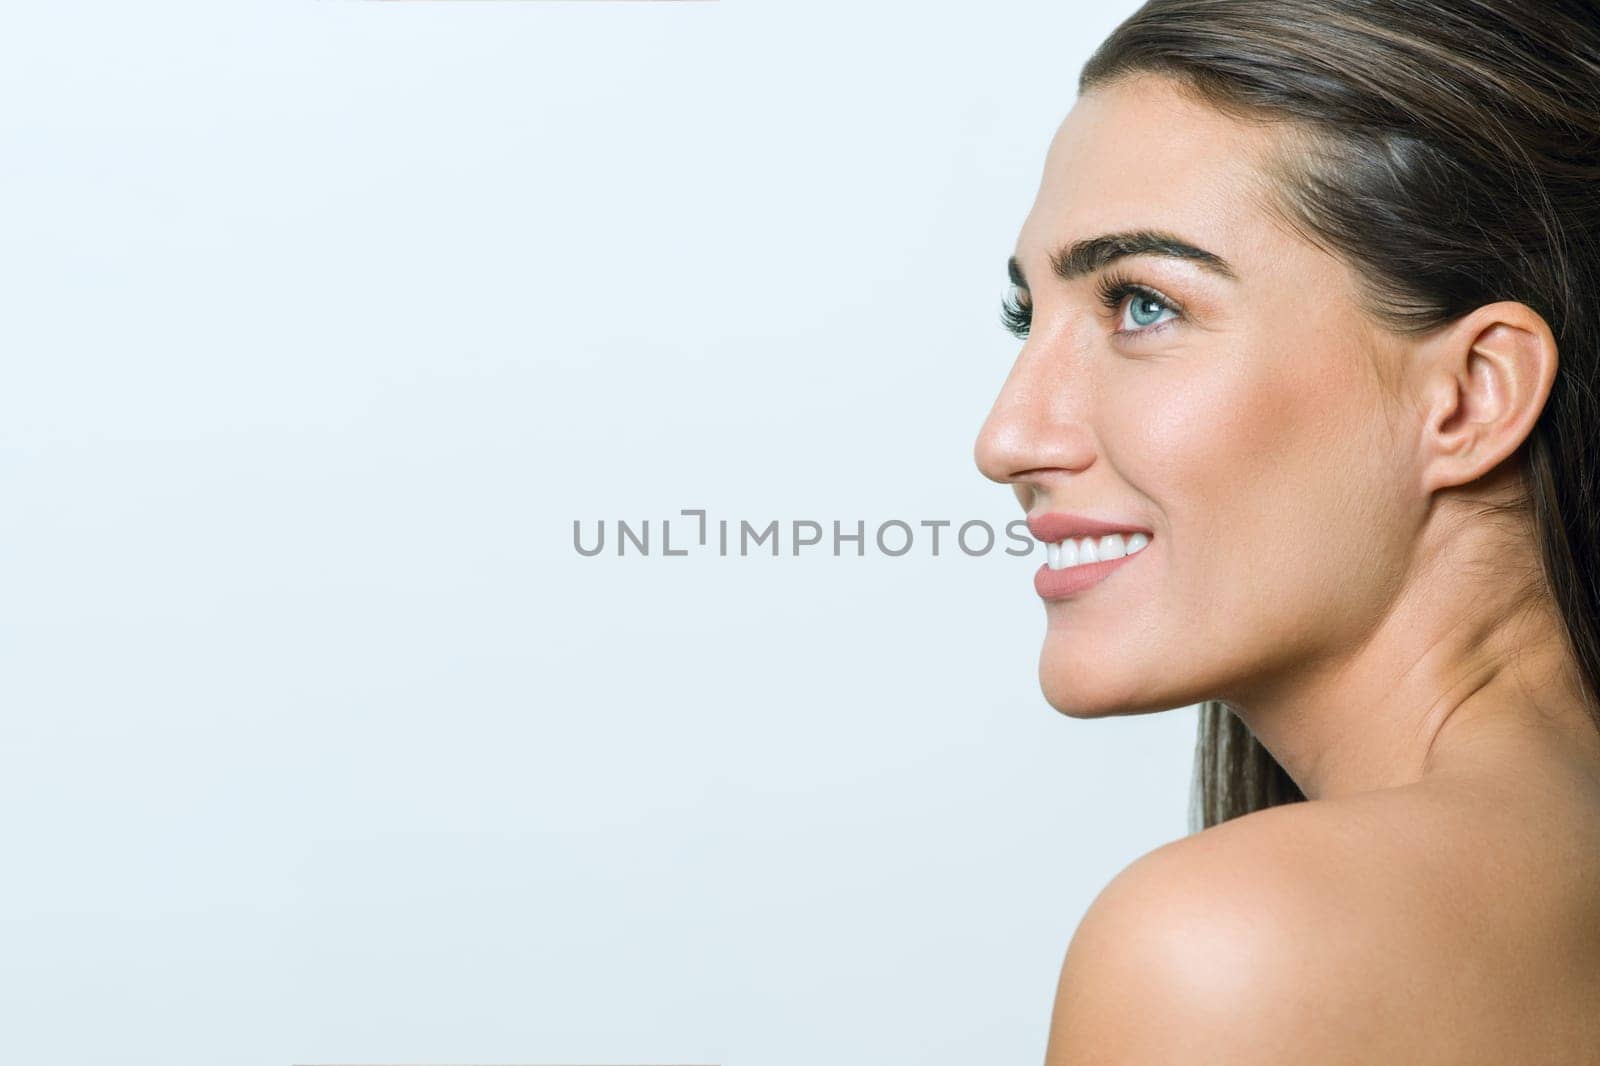 Smiling woman with clean skin, natural make-up, blue eyes, long straight healthy hair and white teeth on white background. Snapshot in profile, copy space